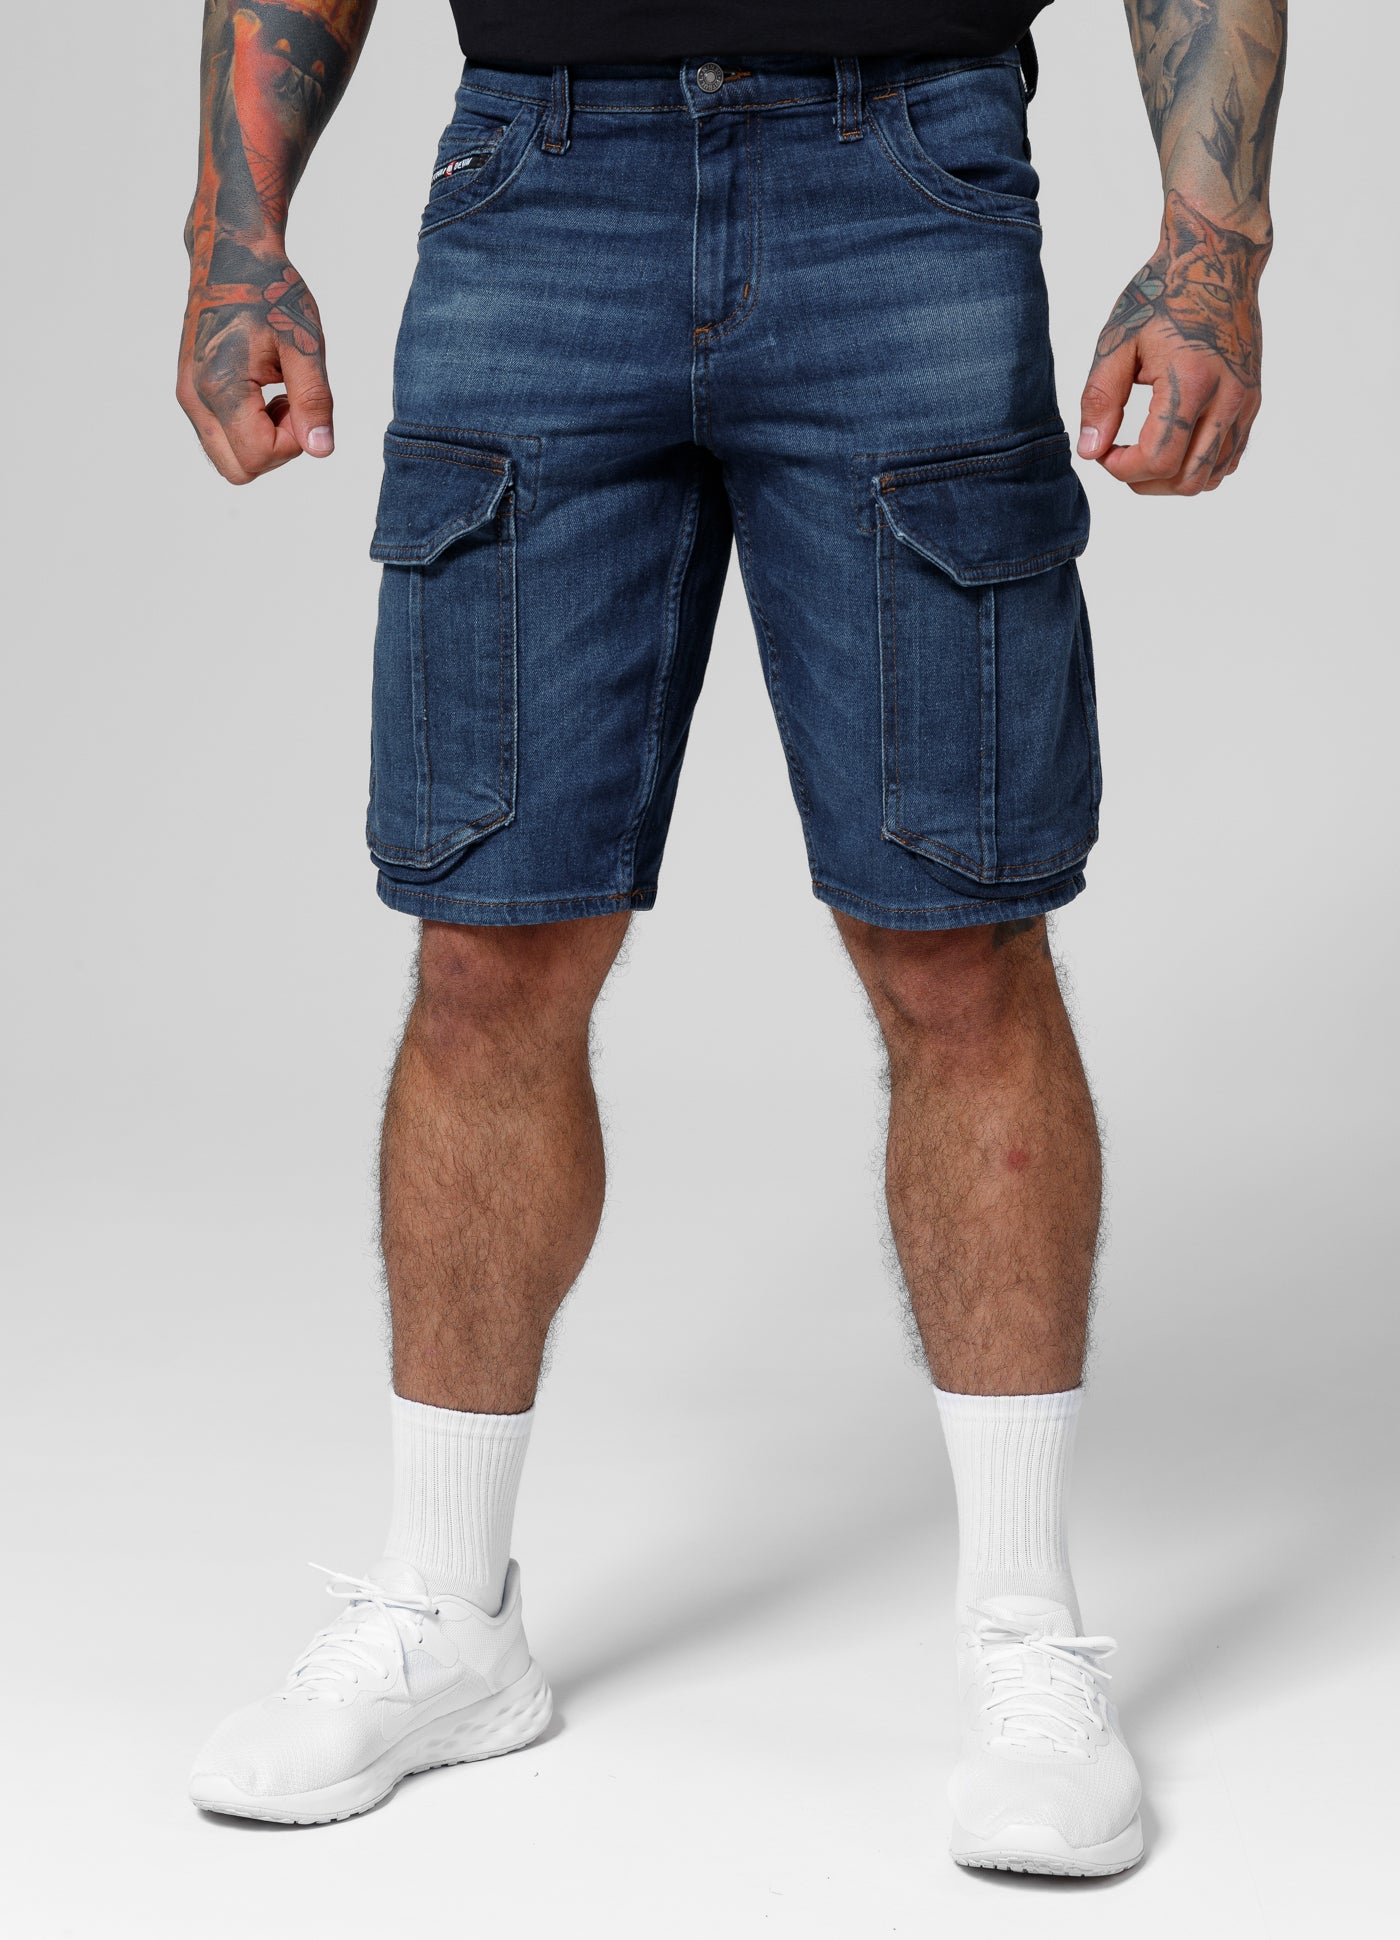 LONGSPUR Cargo Navy Wash Jeans Shorts